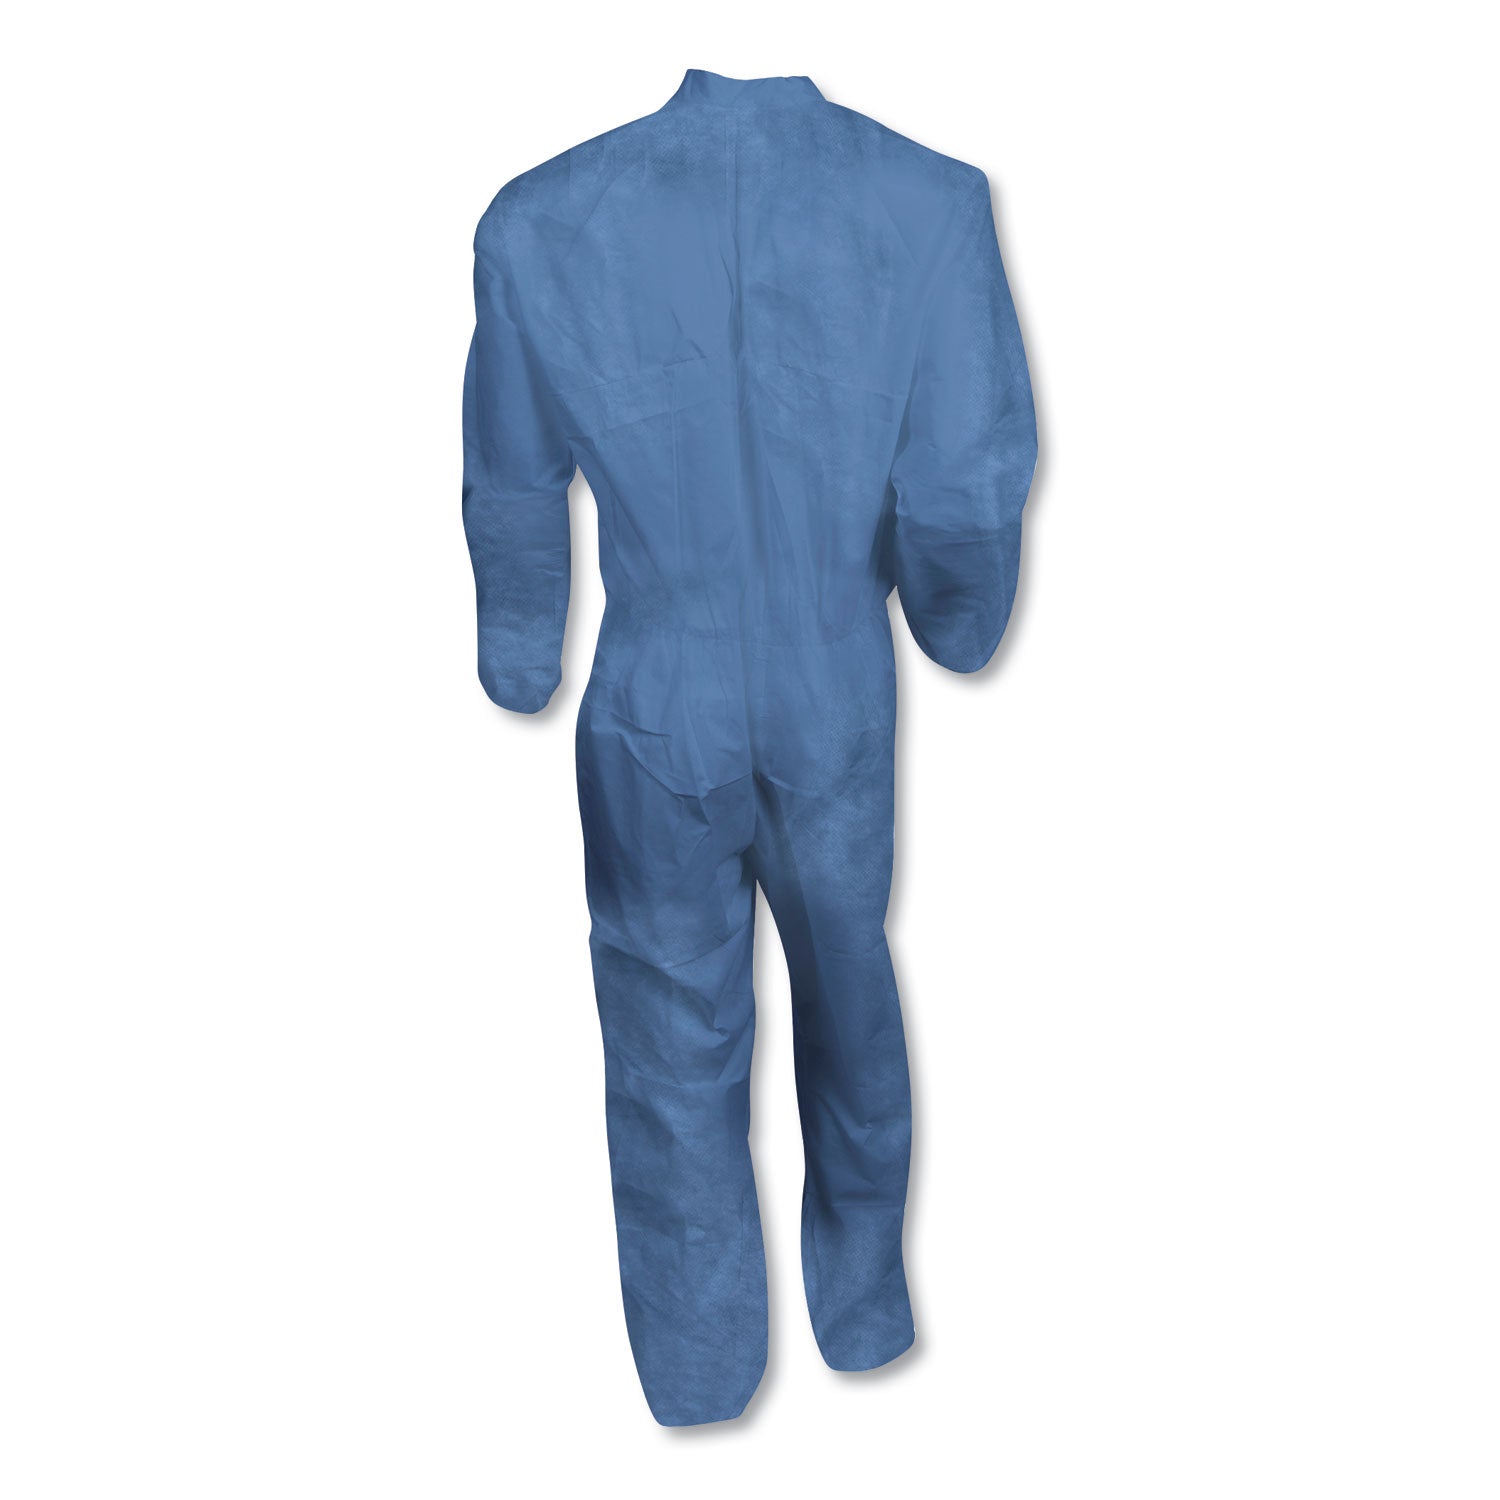 a60-elastic-cuff-ankle-and-back-coveralls-large-blue-24-carton_kcc45003 - 6